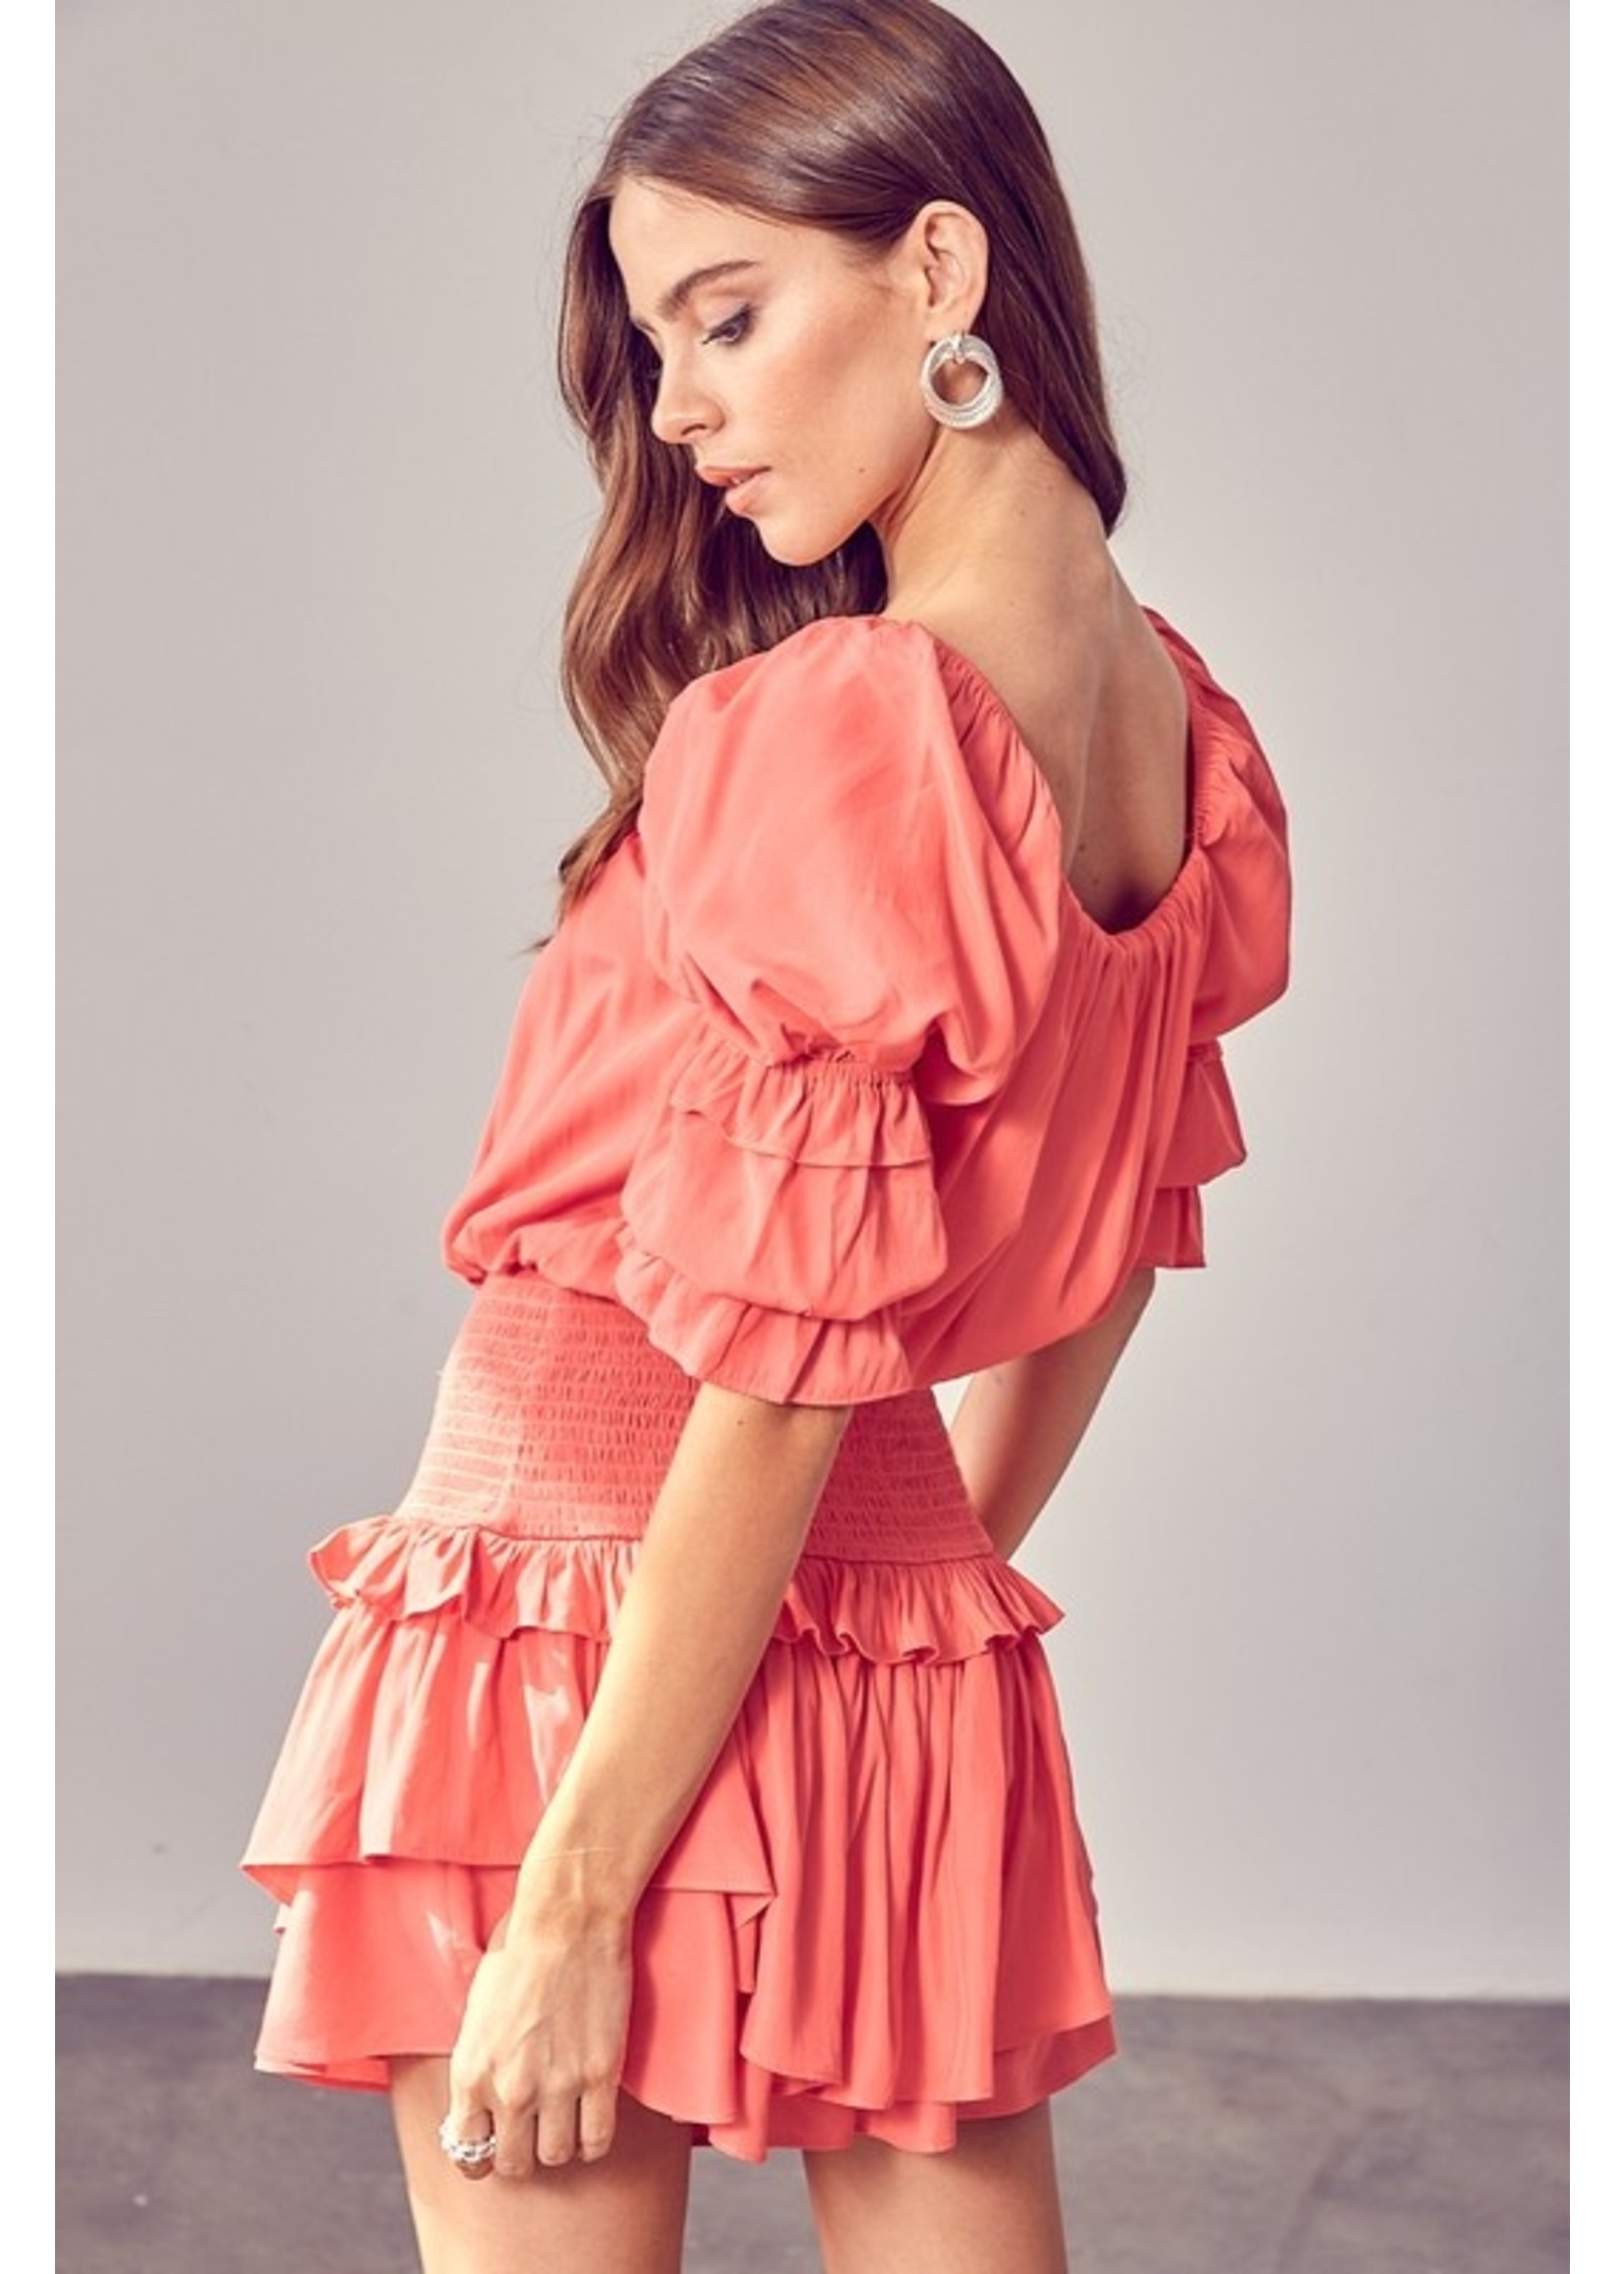 DO + BE Puff Sleeve Smocked And Frilled Romper - Y21081